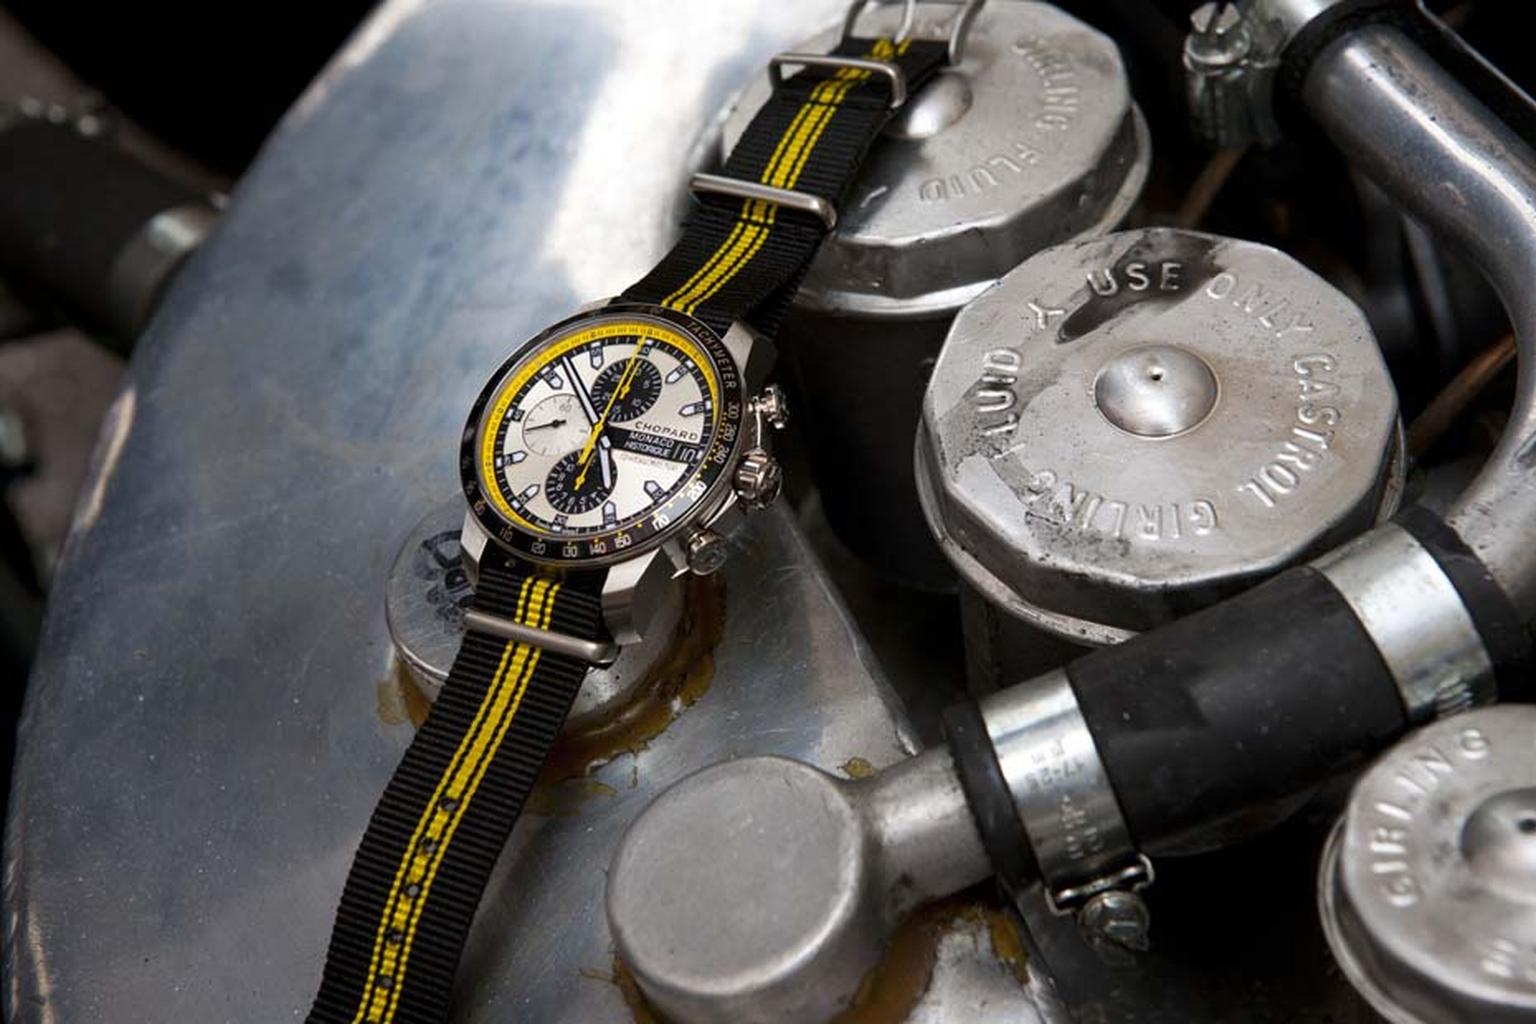 COSC-certified, the new Chopard Grand Prix Monaco Historique Chrono in titanium and stainless steel comes with racy yellow details on the tachymetre.